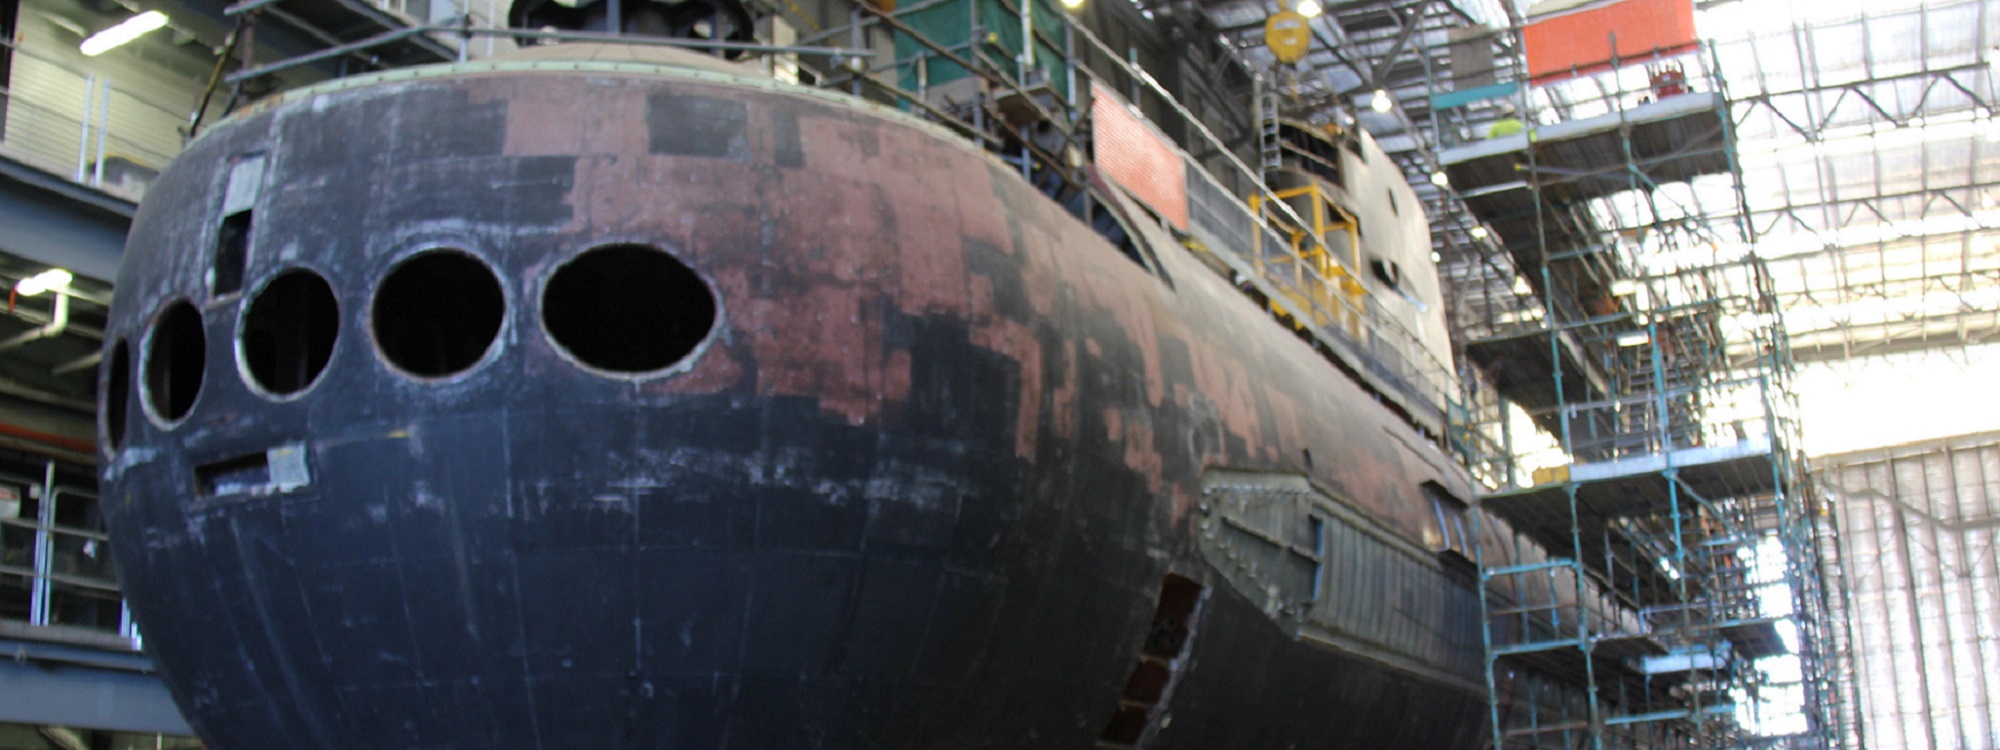 New collaboration with ASC and CSIRO on submarine repair tech — DMTC ...
